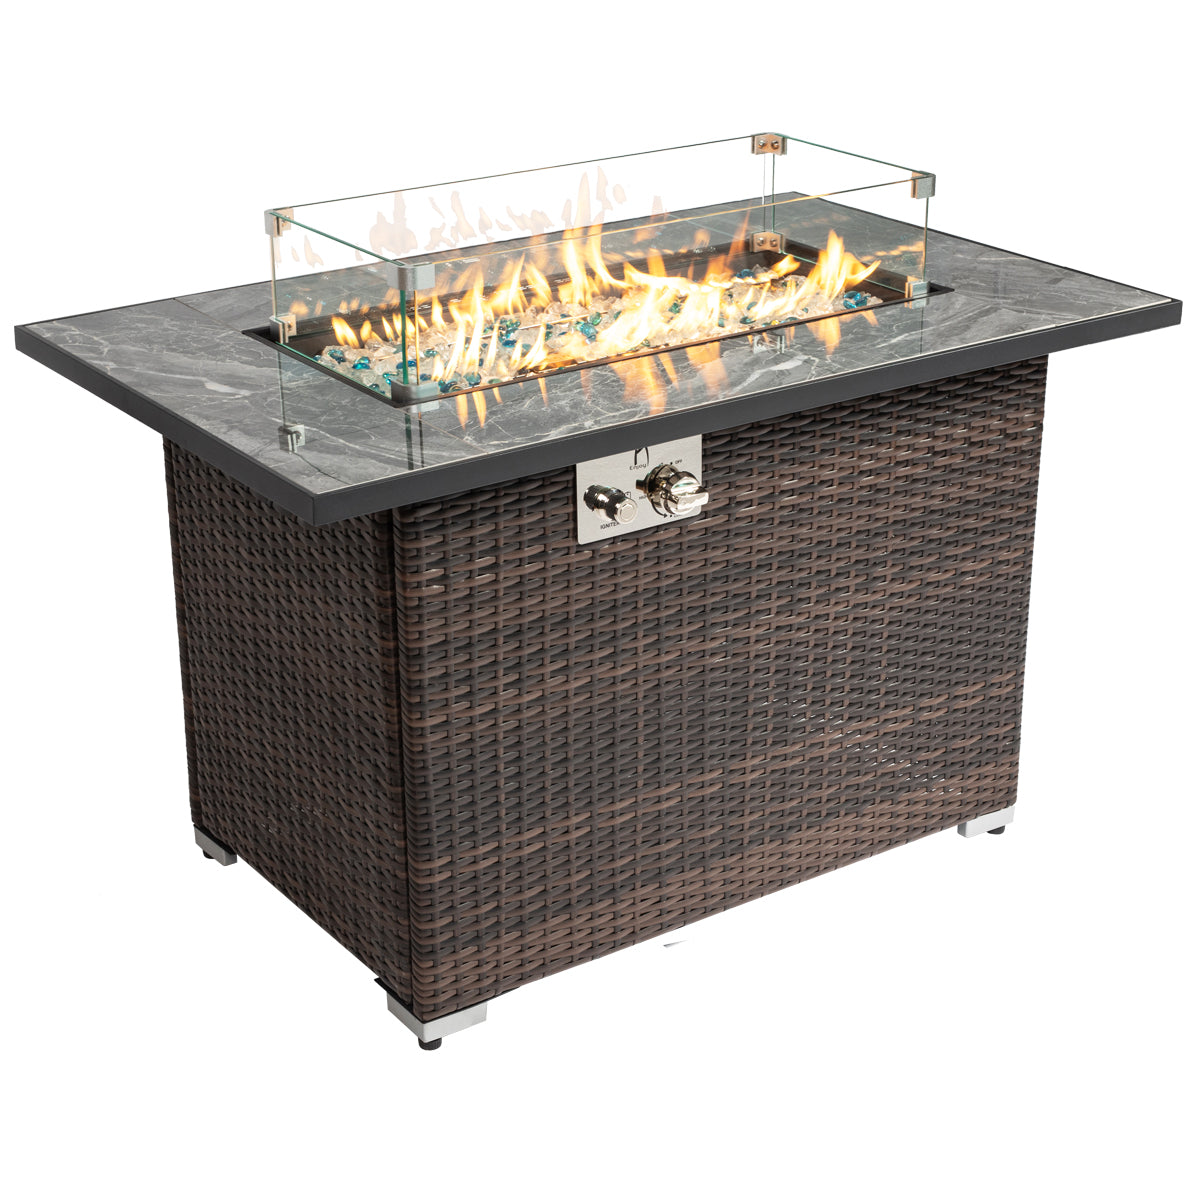 Outdoor Patio Wicker Furniture Rectangular Tile Top Fire Pit Table With Wind Guard-AJ Enjoy Fire Pit